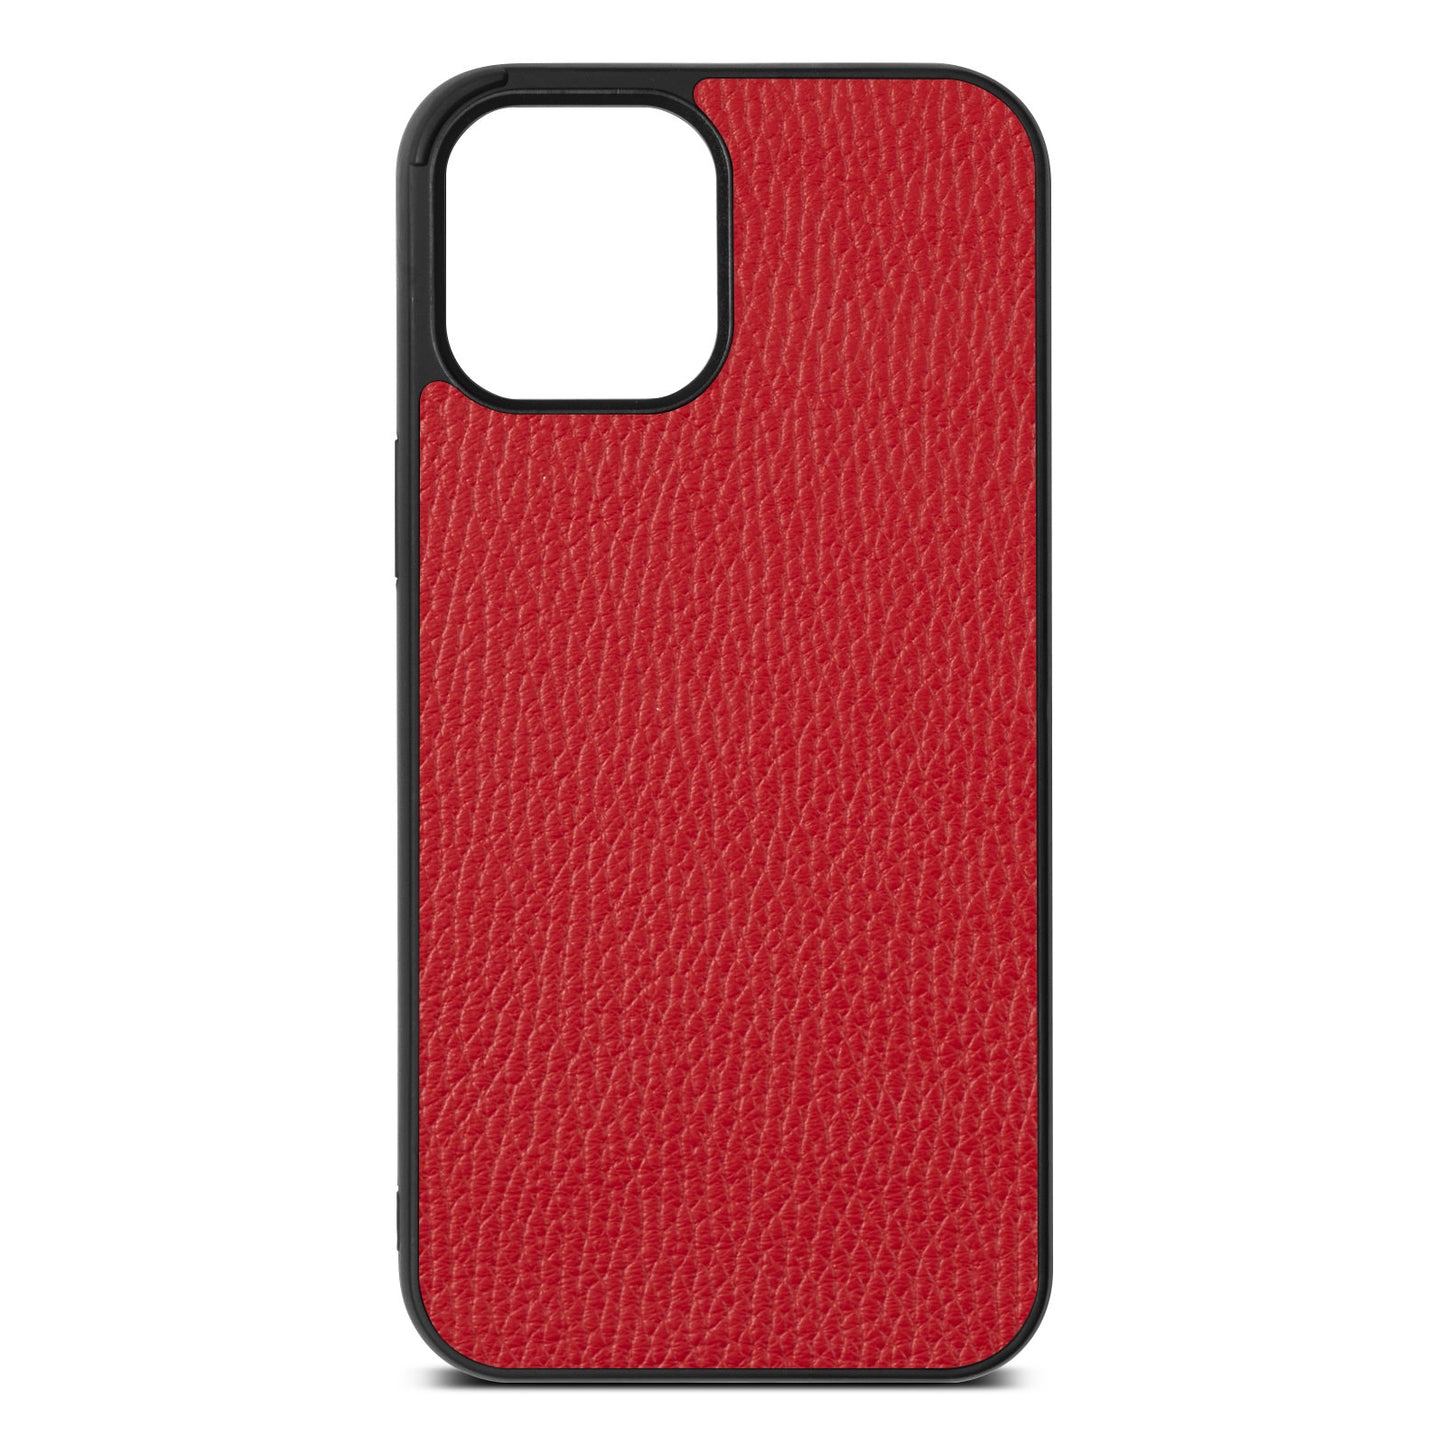 Blank iPhone 12 Pro Max Red Pebble Leather Case